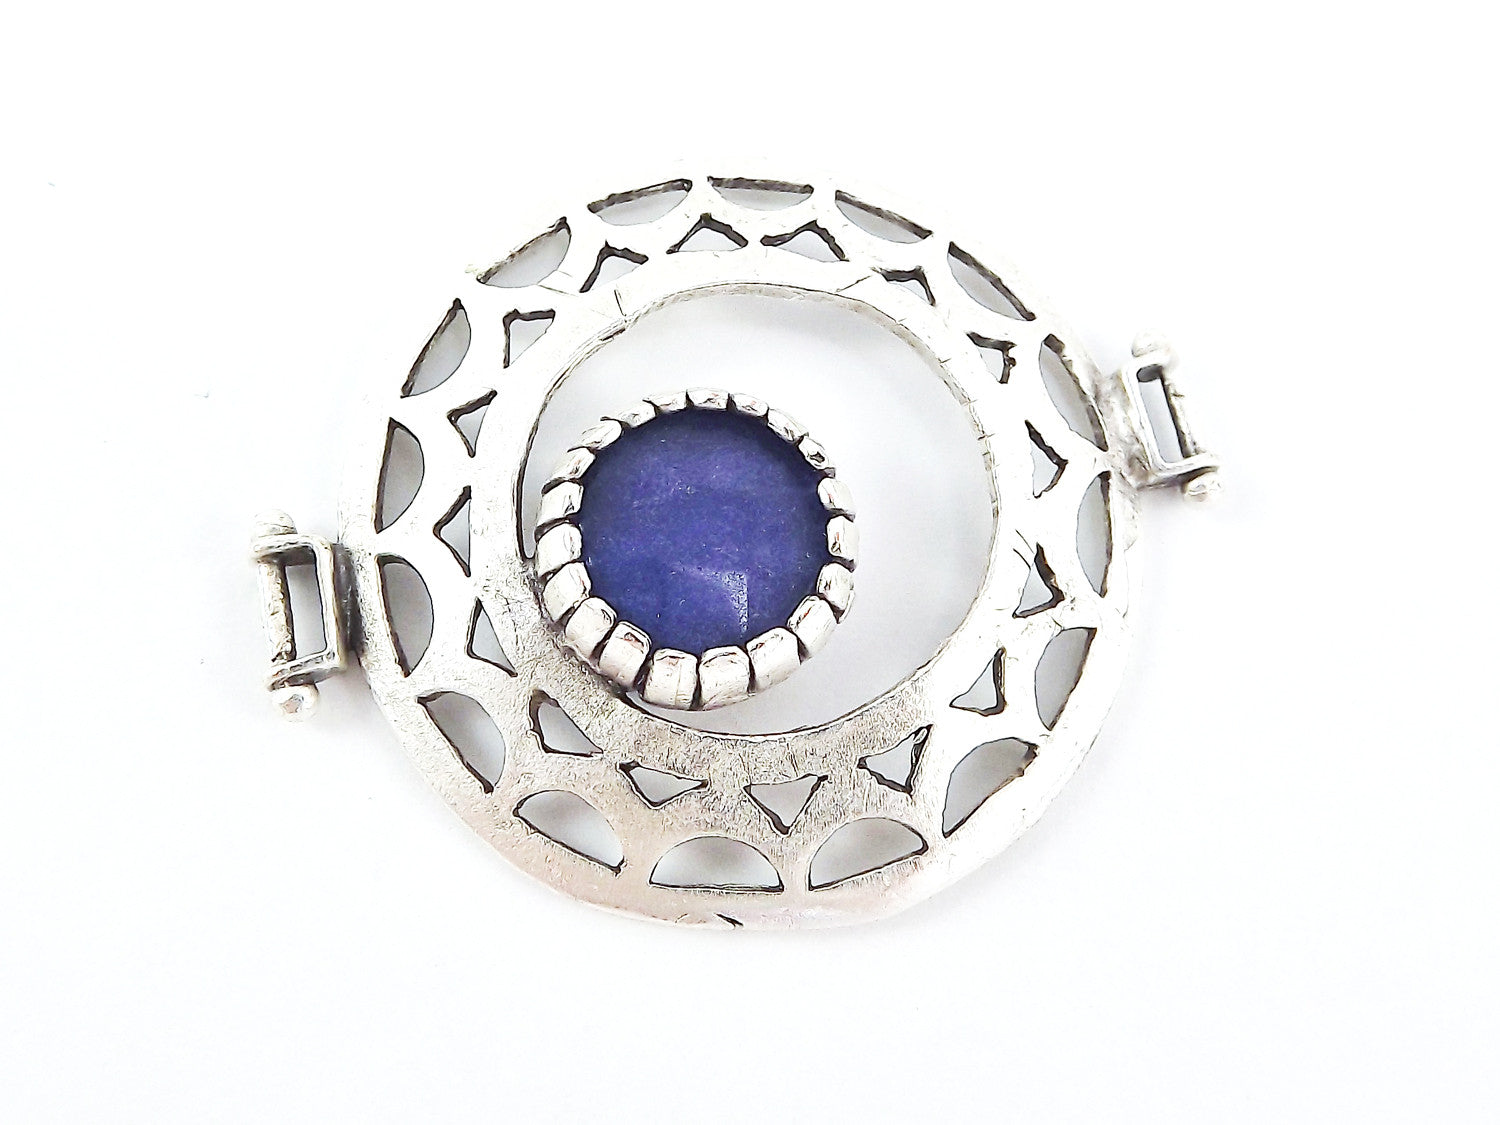 Royal Blue Jade Stone Fretworked Circle Connector Pendant - Matte Silver Plated - 1PC